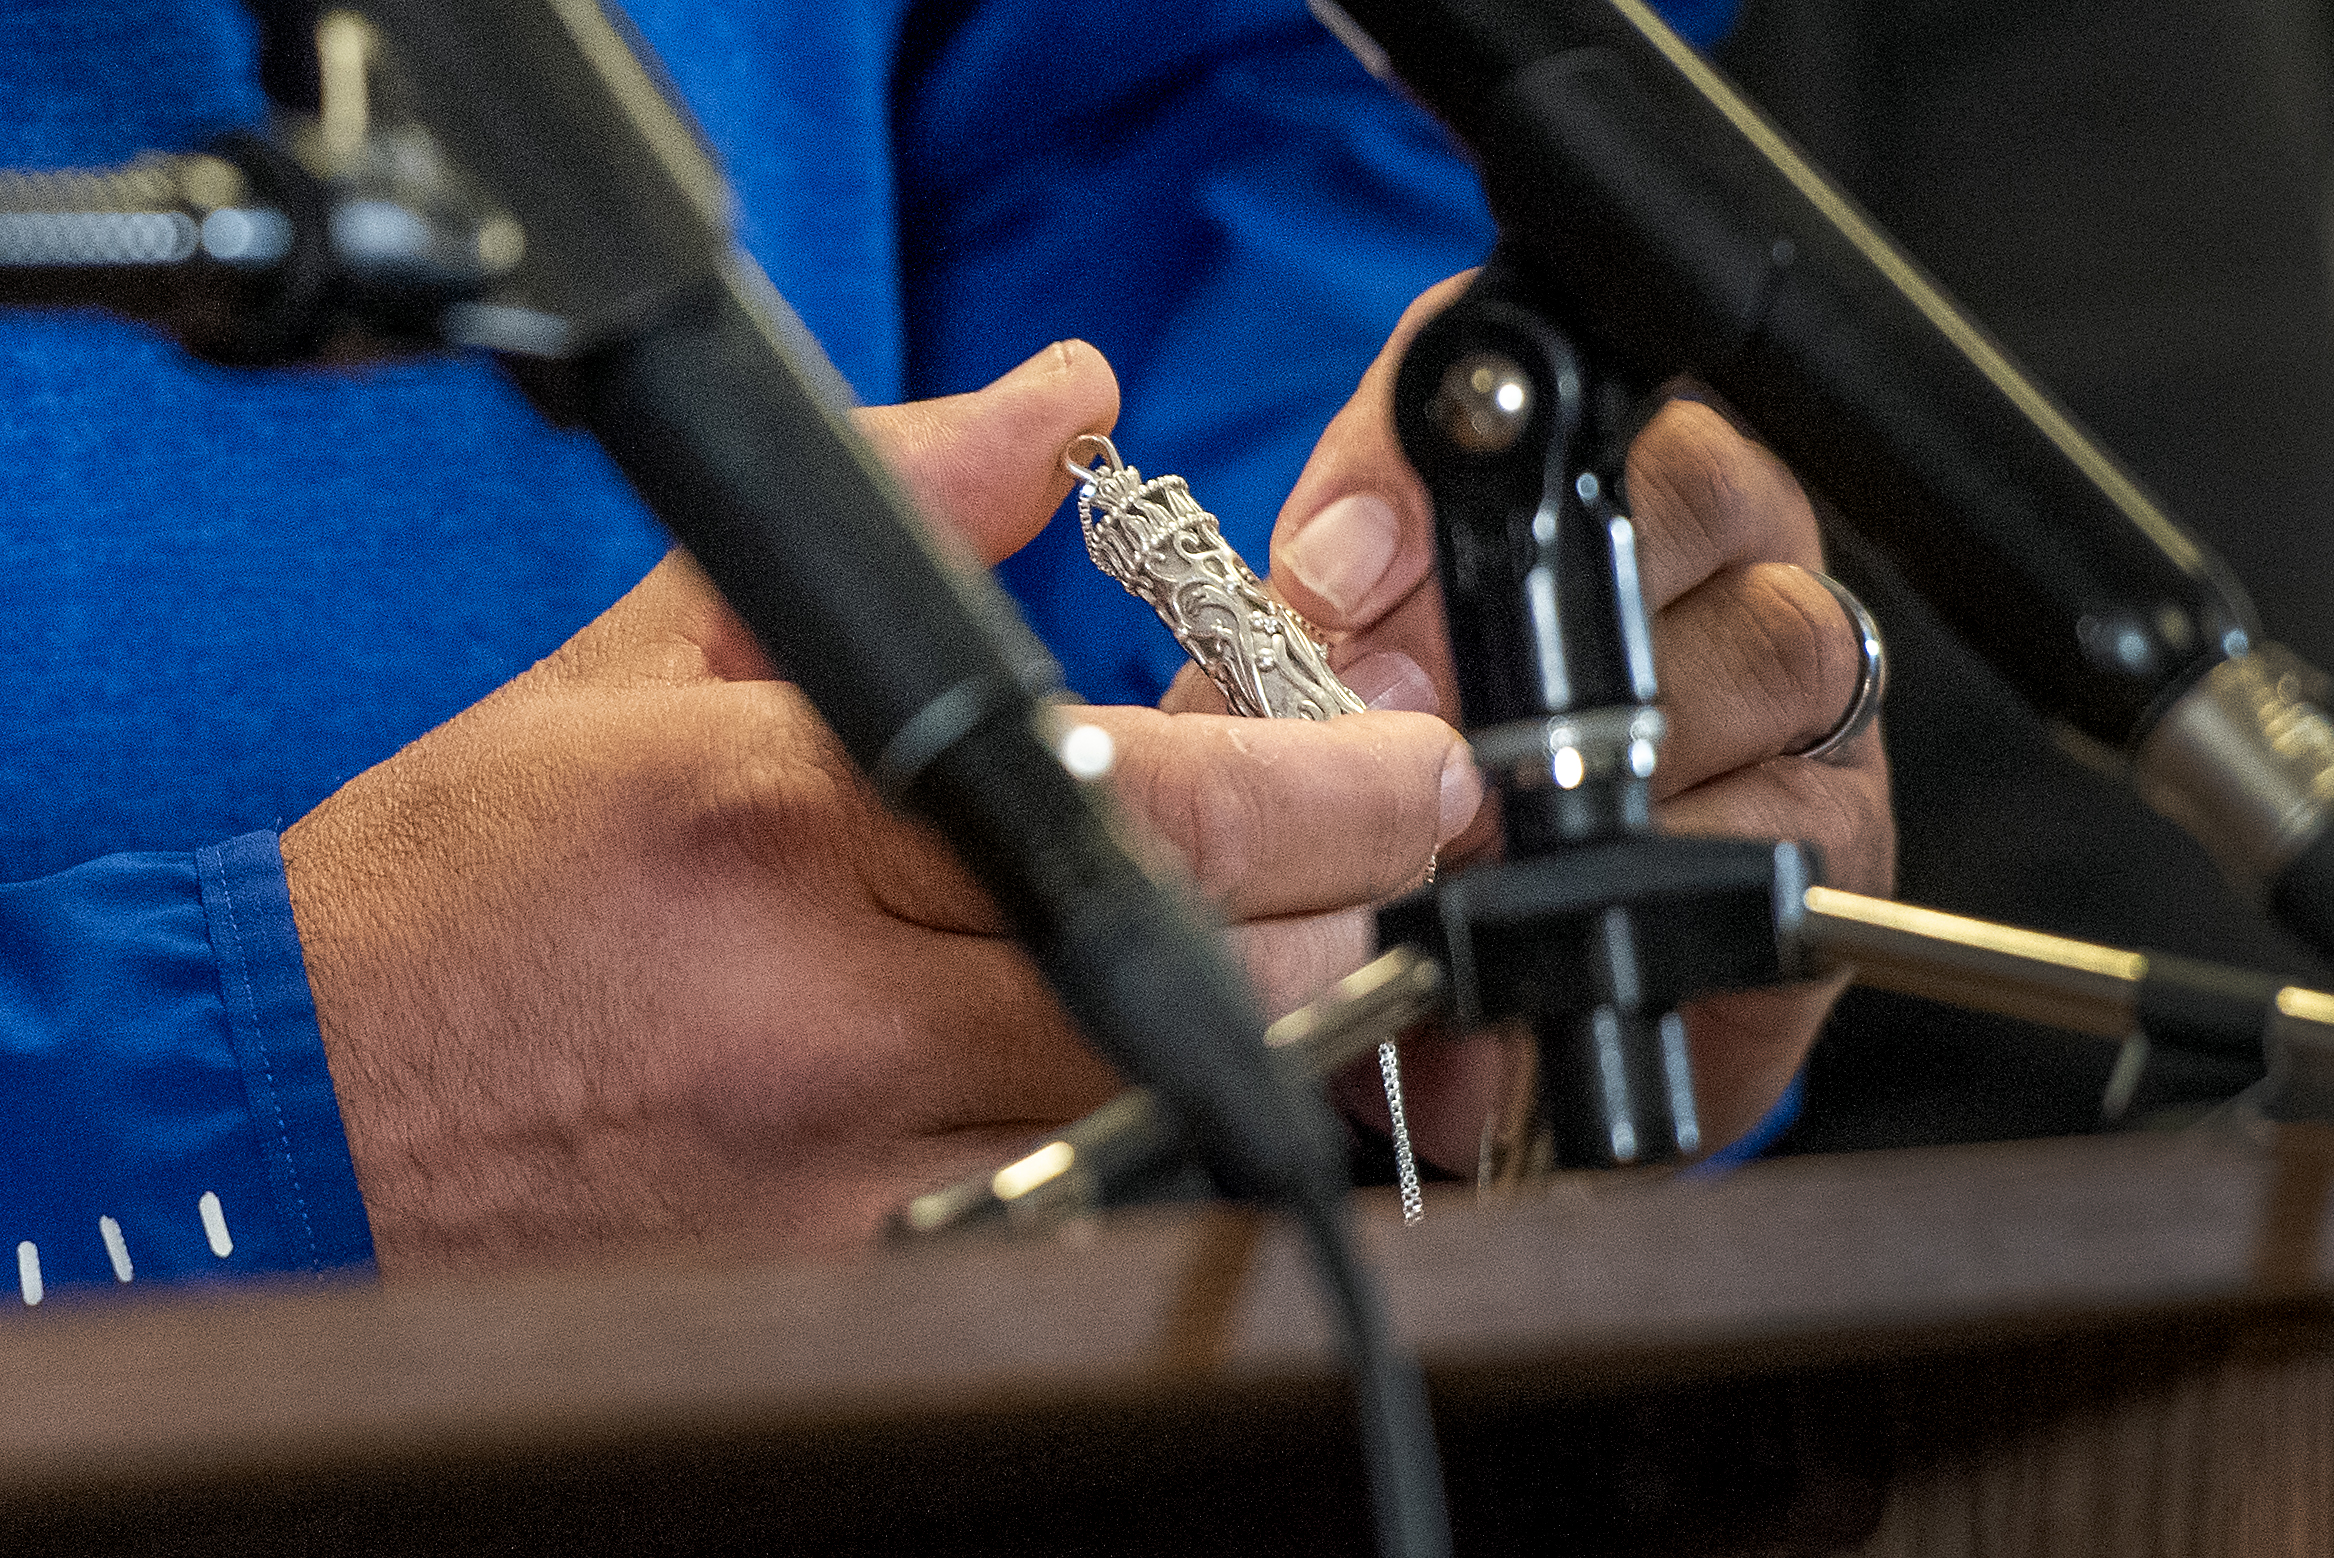 A small silver container with ornate detail is held in the hands of a man speaking at a podium during a press conference.